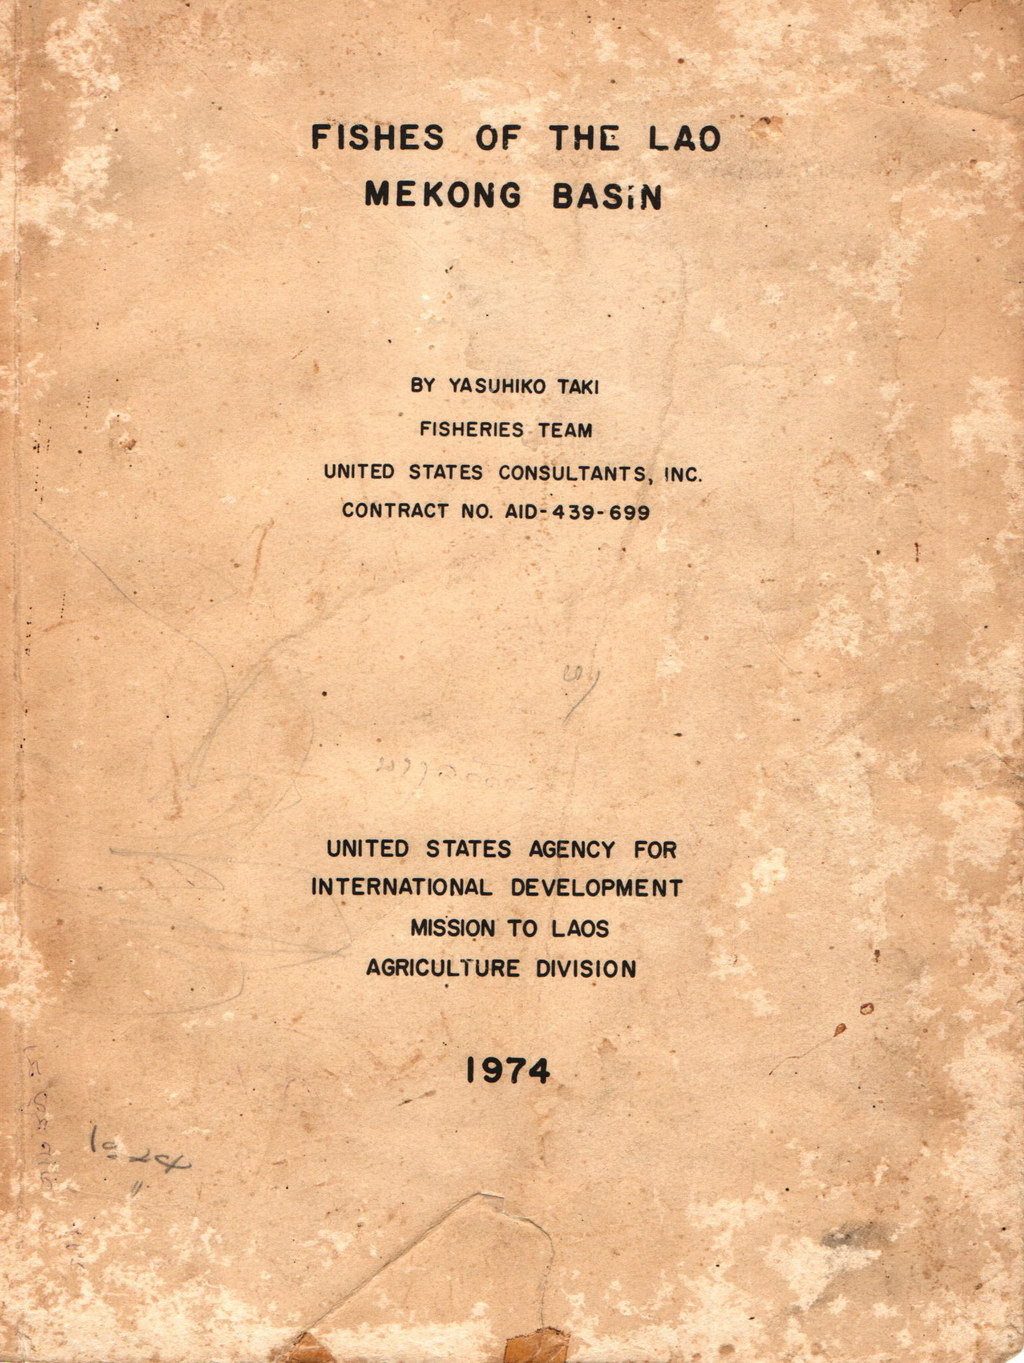 FISHES OF THE LAO MEKONG BASIN